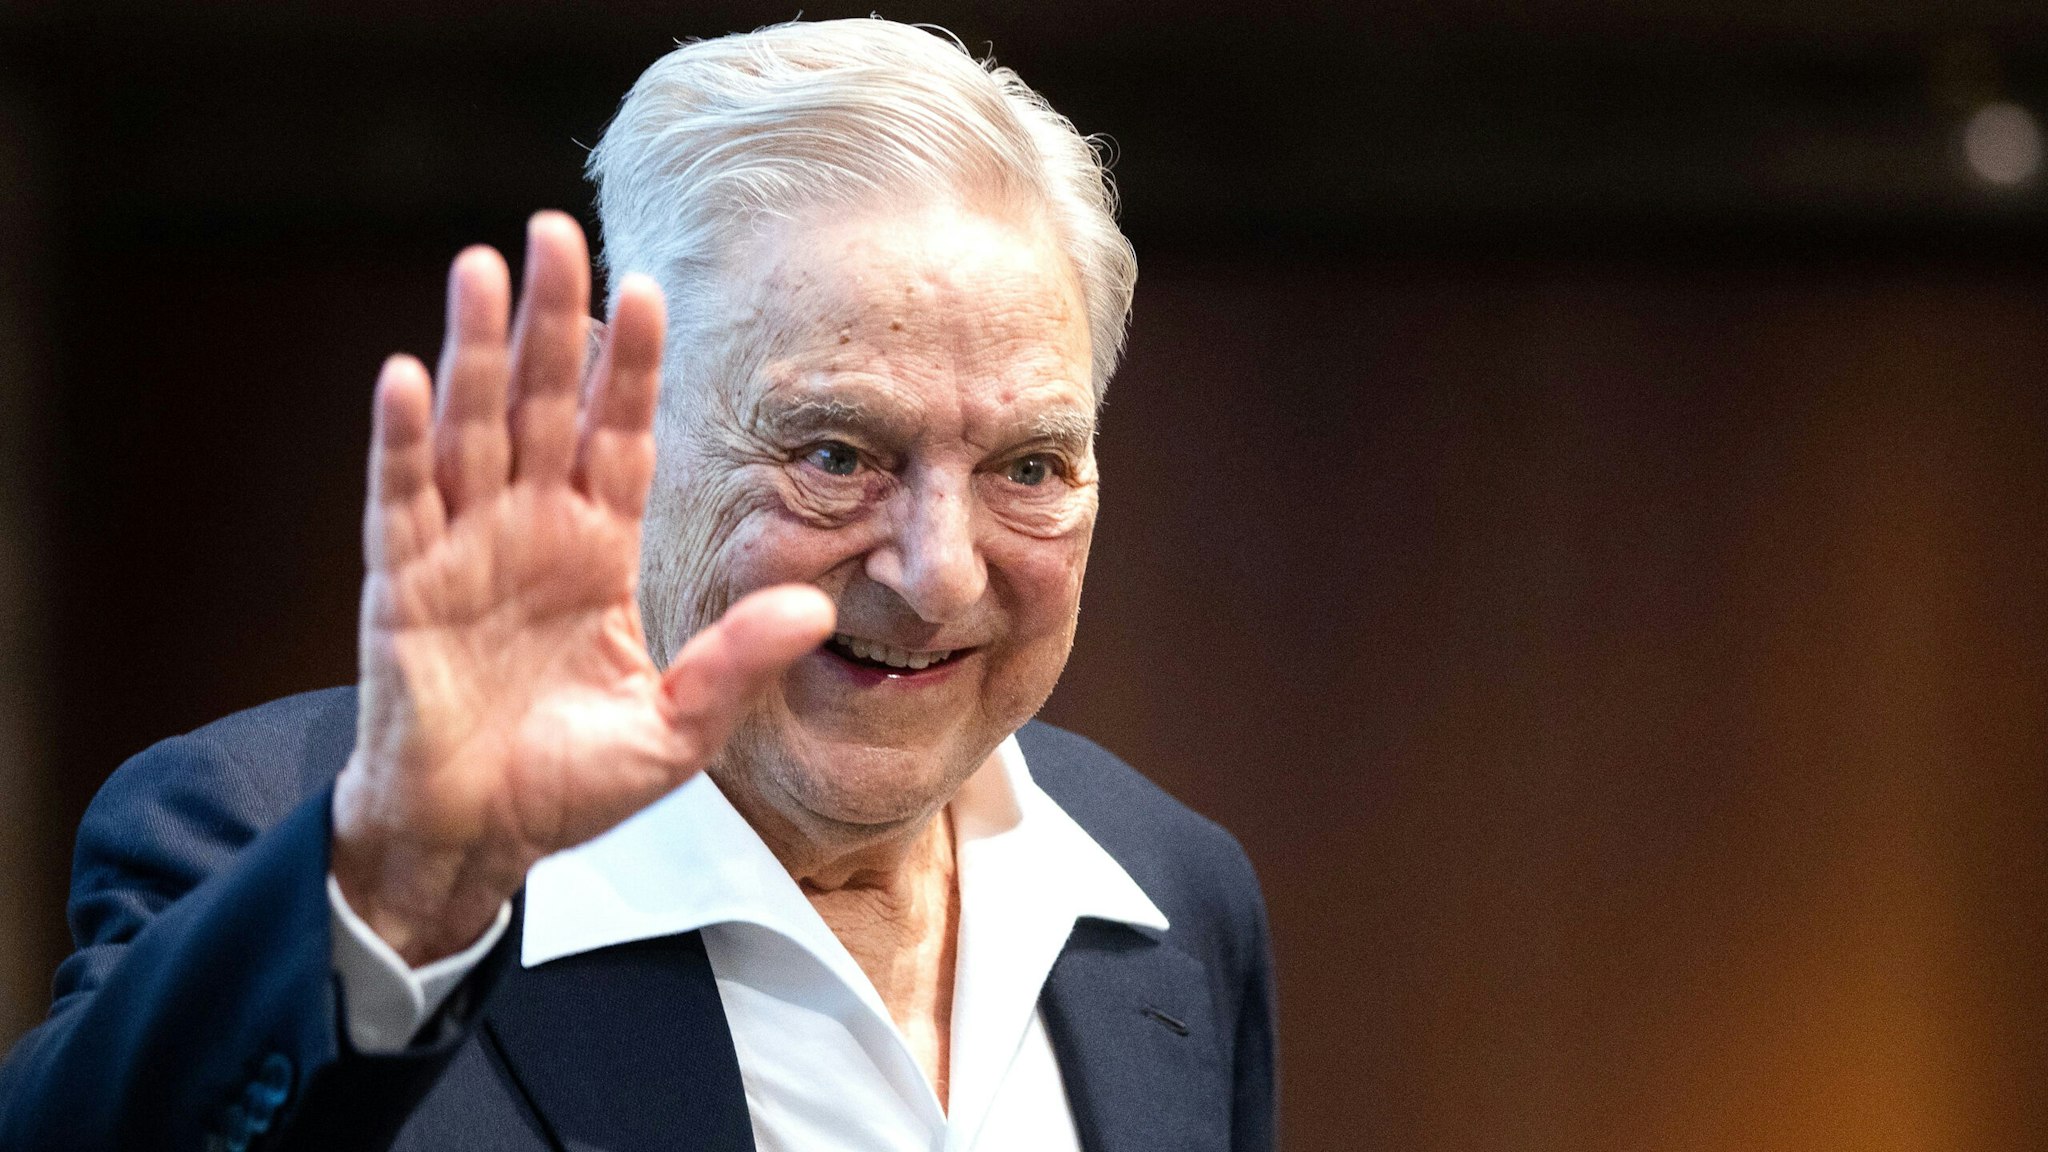 Hungarian-born US investor and philanthropist George Soros talks to the audience after receiving the Schumpeter Award 2019 in Vienna, Austria on June 21, 2019.